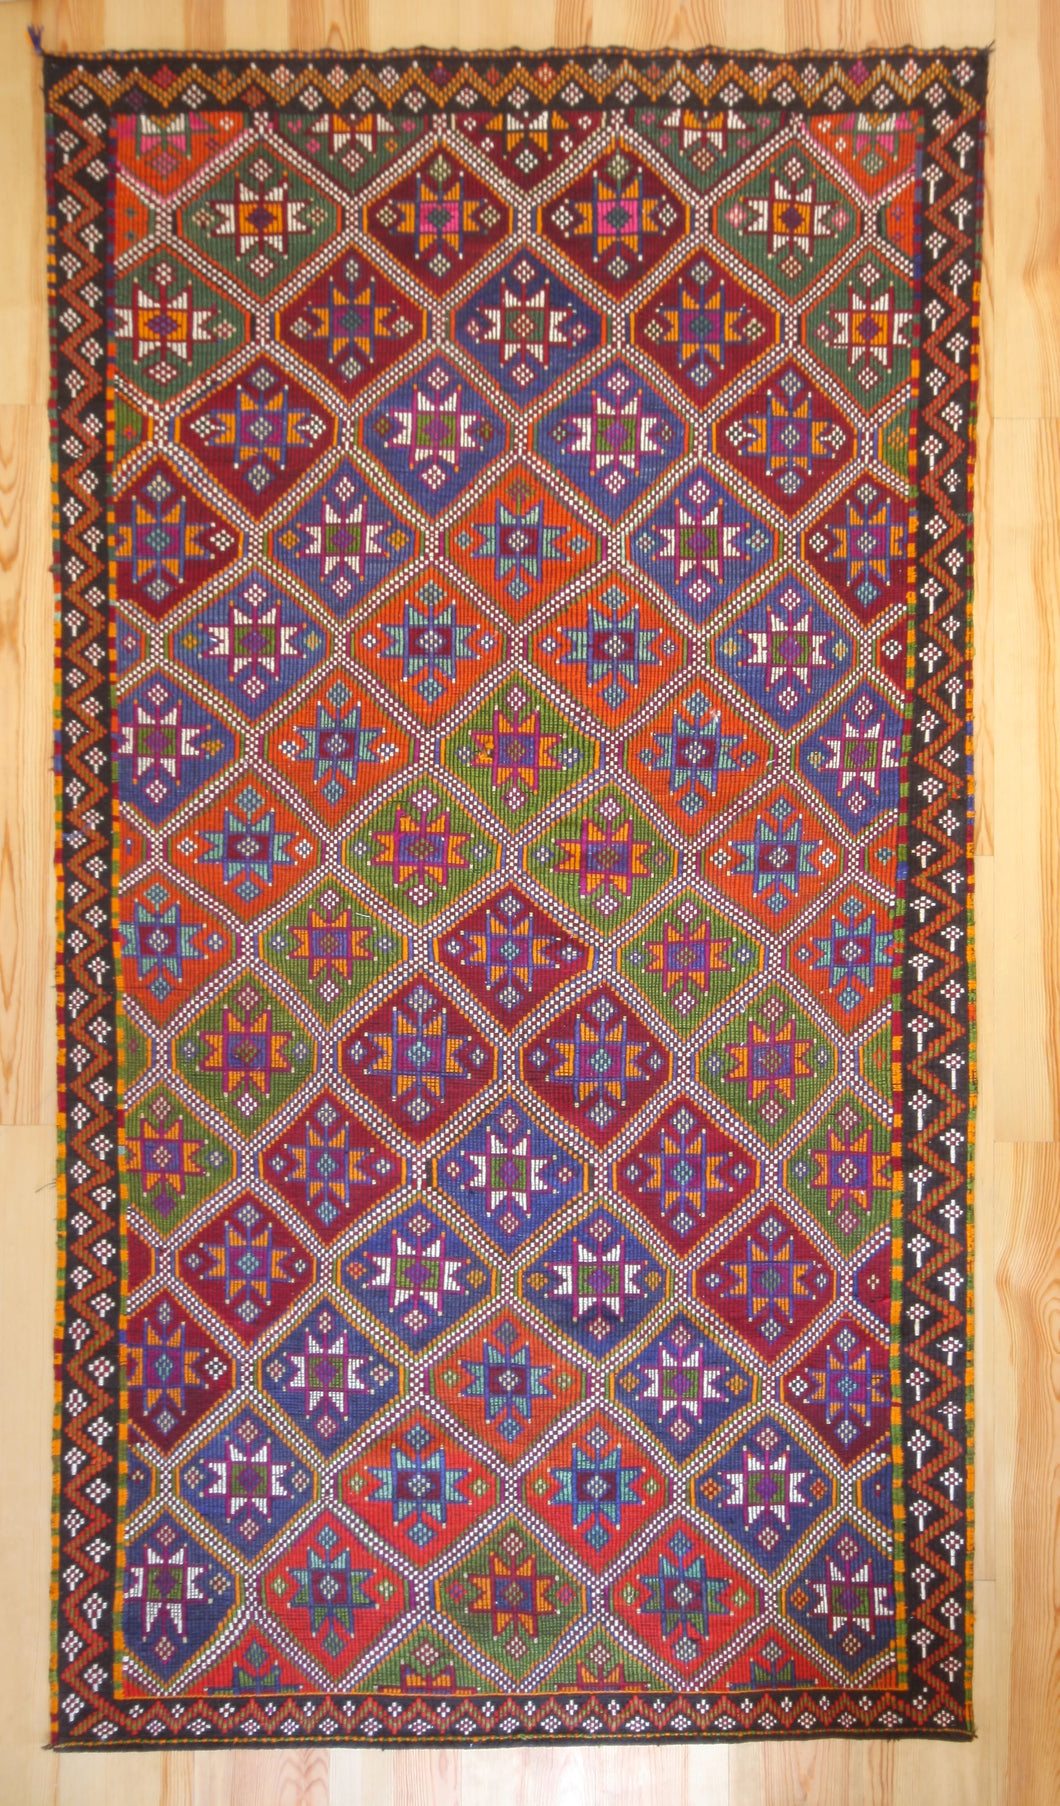 6x9 Vintage Anatolian Turkish Kilim Area Rug | Repeating staggered all over tribal motifs with stars in centers | SKU 535